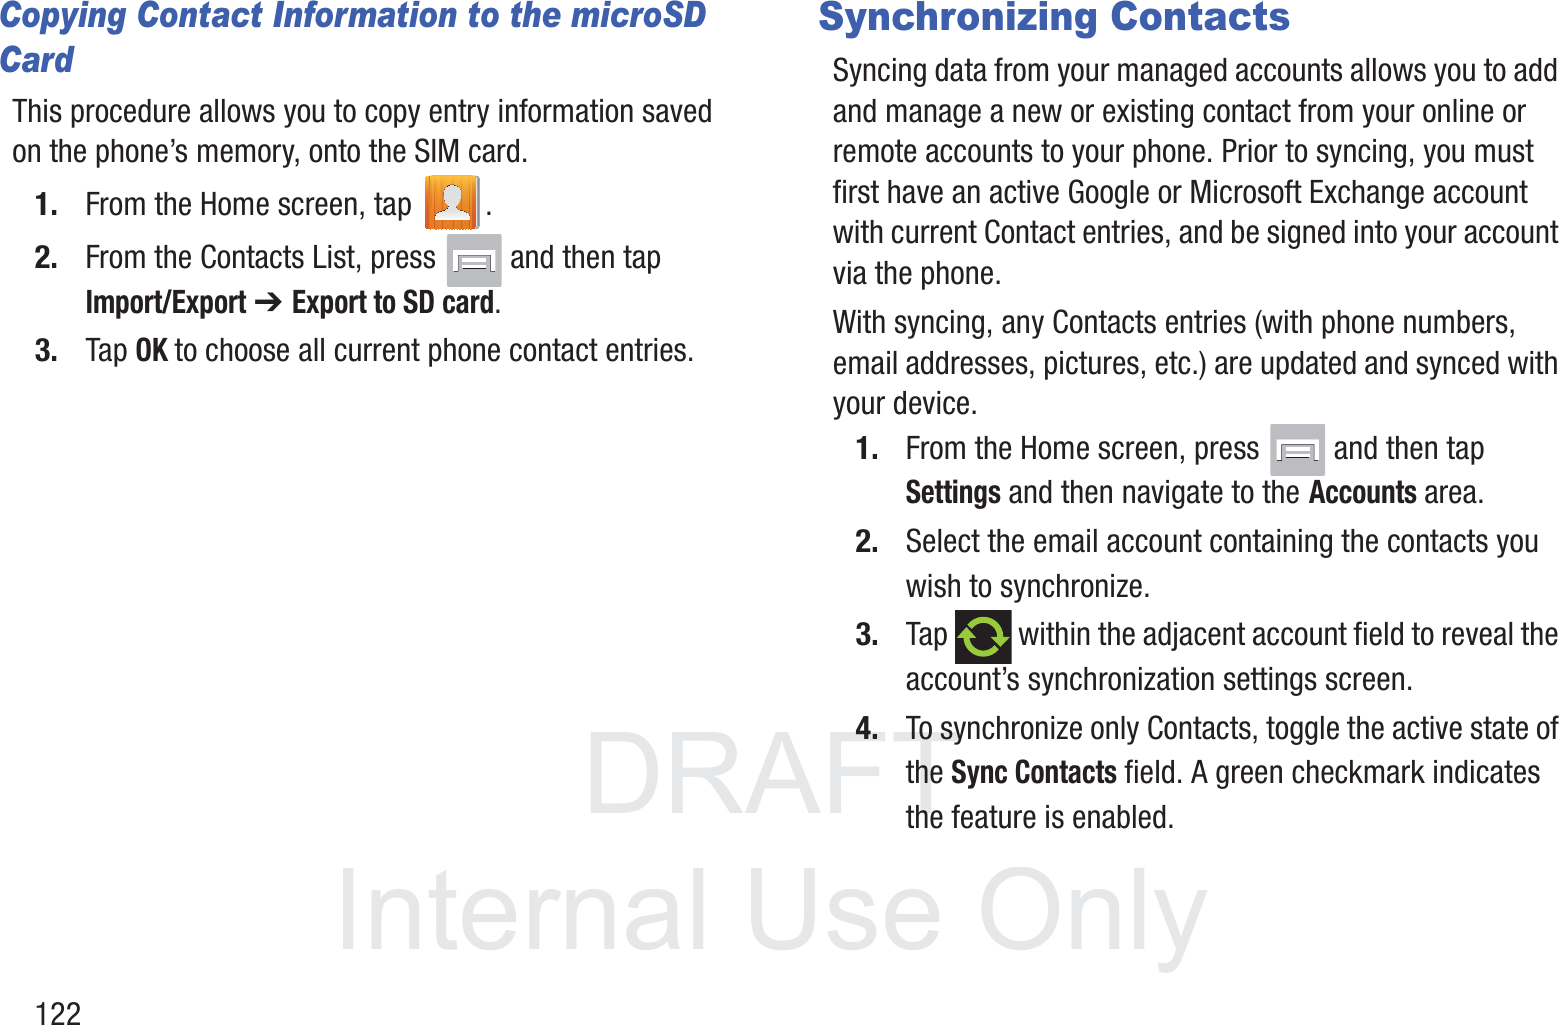 DRAFT InternalUse Only122Copying Contact Information to the microSD CardThis procedure allows you to copy entry information saved on the phone’s memory, onto the SIM card.1. From the Home screen, tap  .2. From the Contacts List, press   and then tap Import/Export ➔ Export to SD card.3. Tap OK to choose all current phone contact entries.Synchronizing ContactsSyncing data from your managed accounts allows you to add and manage a new or existing contact from your online or remote accounts to your phone. Prior to syncing, you must first have an active Google or Microsoft Exchange account with current Contact entries, and be signed into your account via the phone.With syncing, any Contacts entries (with phone numbers, email addresses, pictures, etc.) are updated and synced with your device. 1. From the Home screen, press   and then tap Settings and then navigate to the Accounts area.2. Select the email account containing the contacts you wish to synchronize.3. Tap   within the adjacent account field to reveal the account’s synchronization settings screen.4. To synchronize only Contacts, toggle the active state of the Sync Contacts field. A green checkmark indicates the feature is enabled.